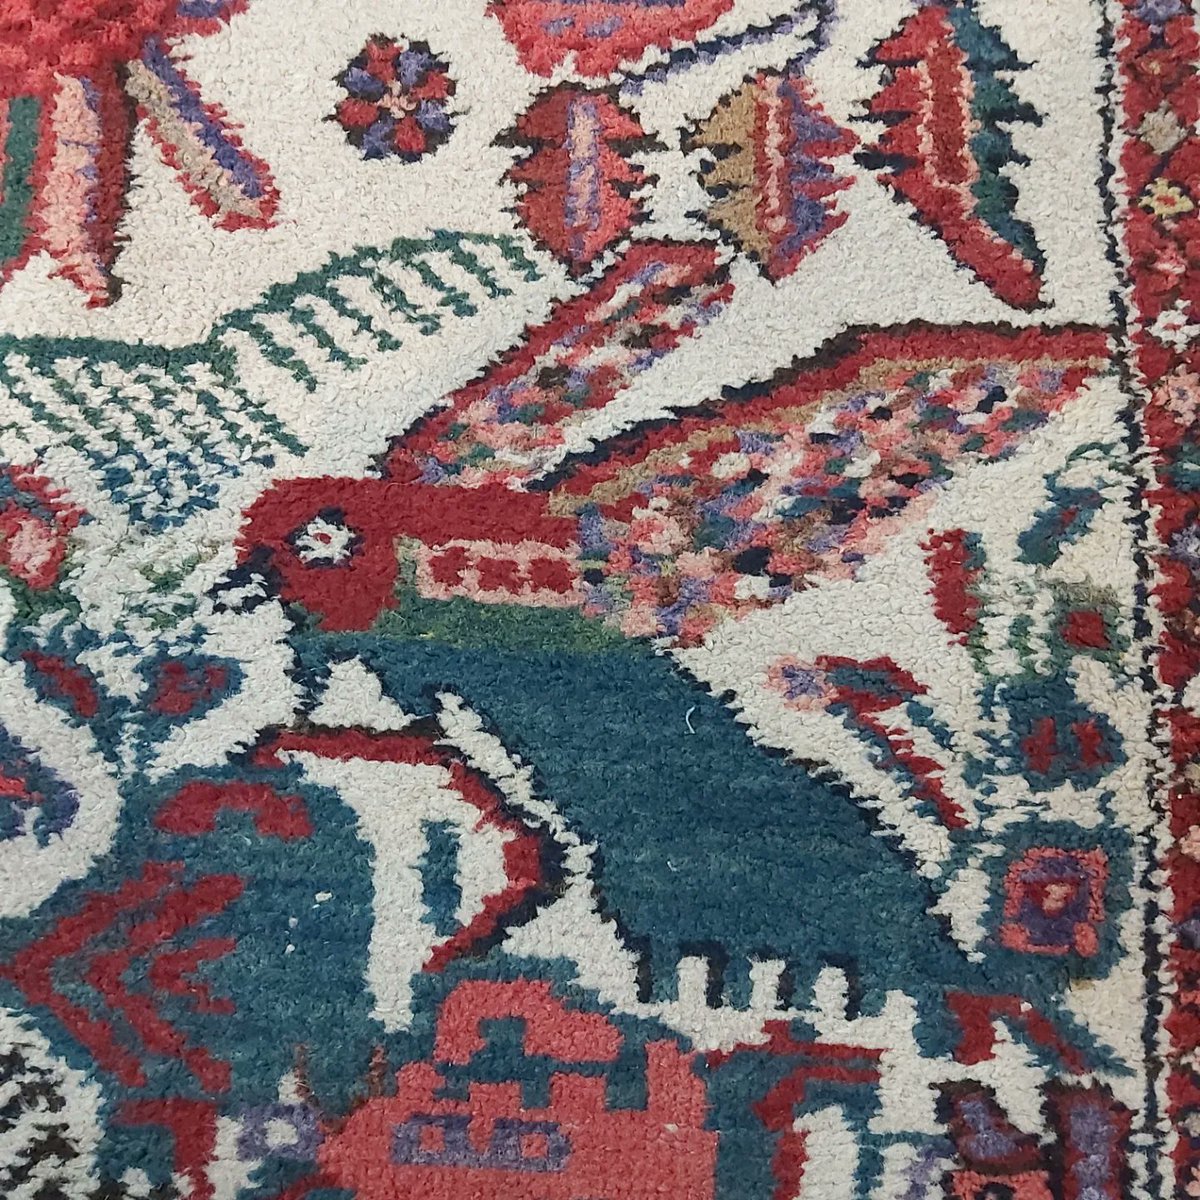 This is a tribal 'Bakhtiyar' rug. The fantastic animal motifs and wonderful colour combination in this rug is stunning.

#carpetdom #carpet #rug #tribal #tribalartwork #tribalkilim #tribalcollection #triballife #tribalrug #bakhtiyarrug #bakhtiyarcarpet #interiordesign #antika